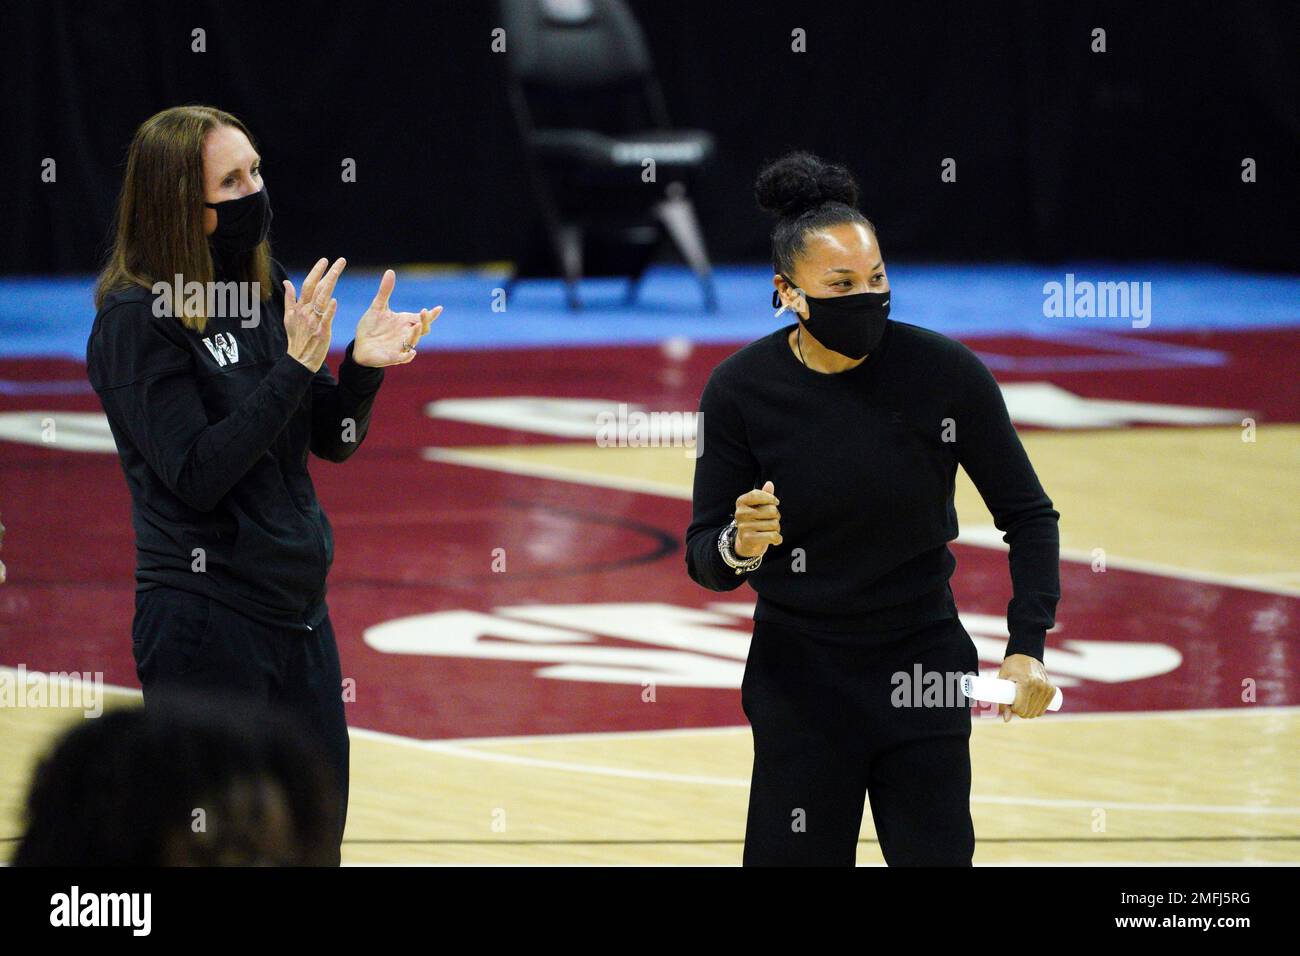 South Carolina head coach Dawn Staley, right, and assistant coach